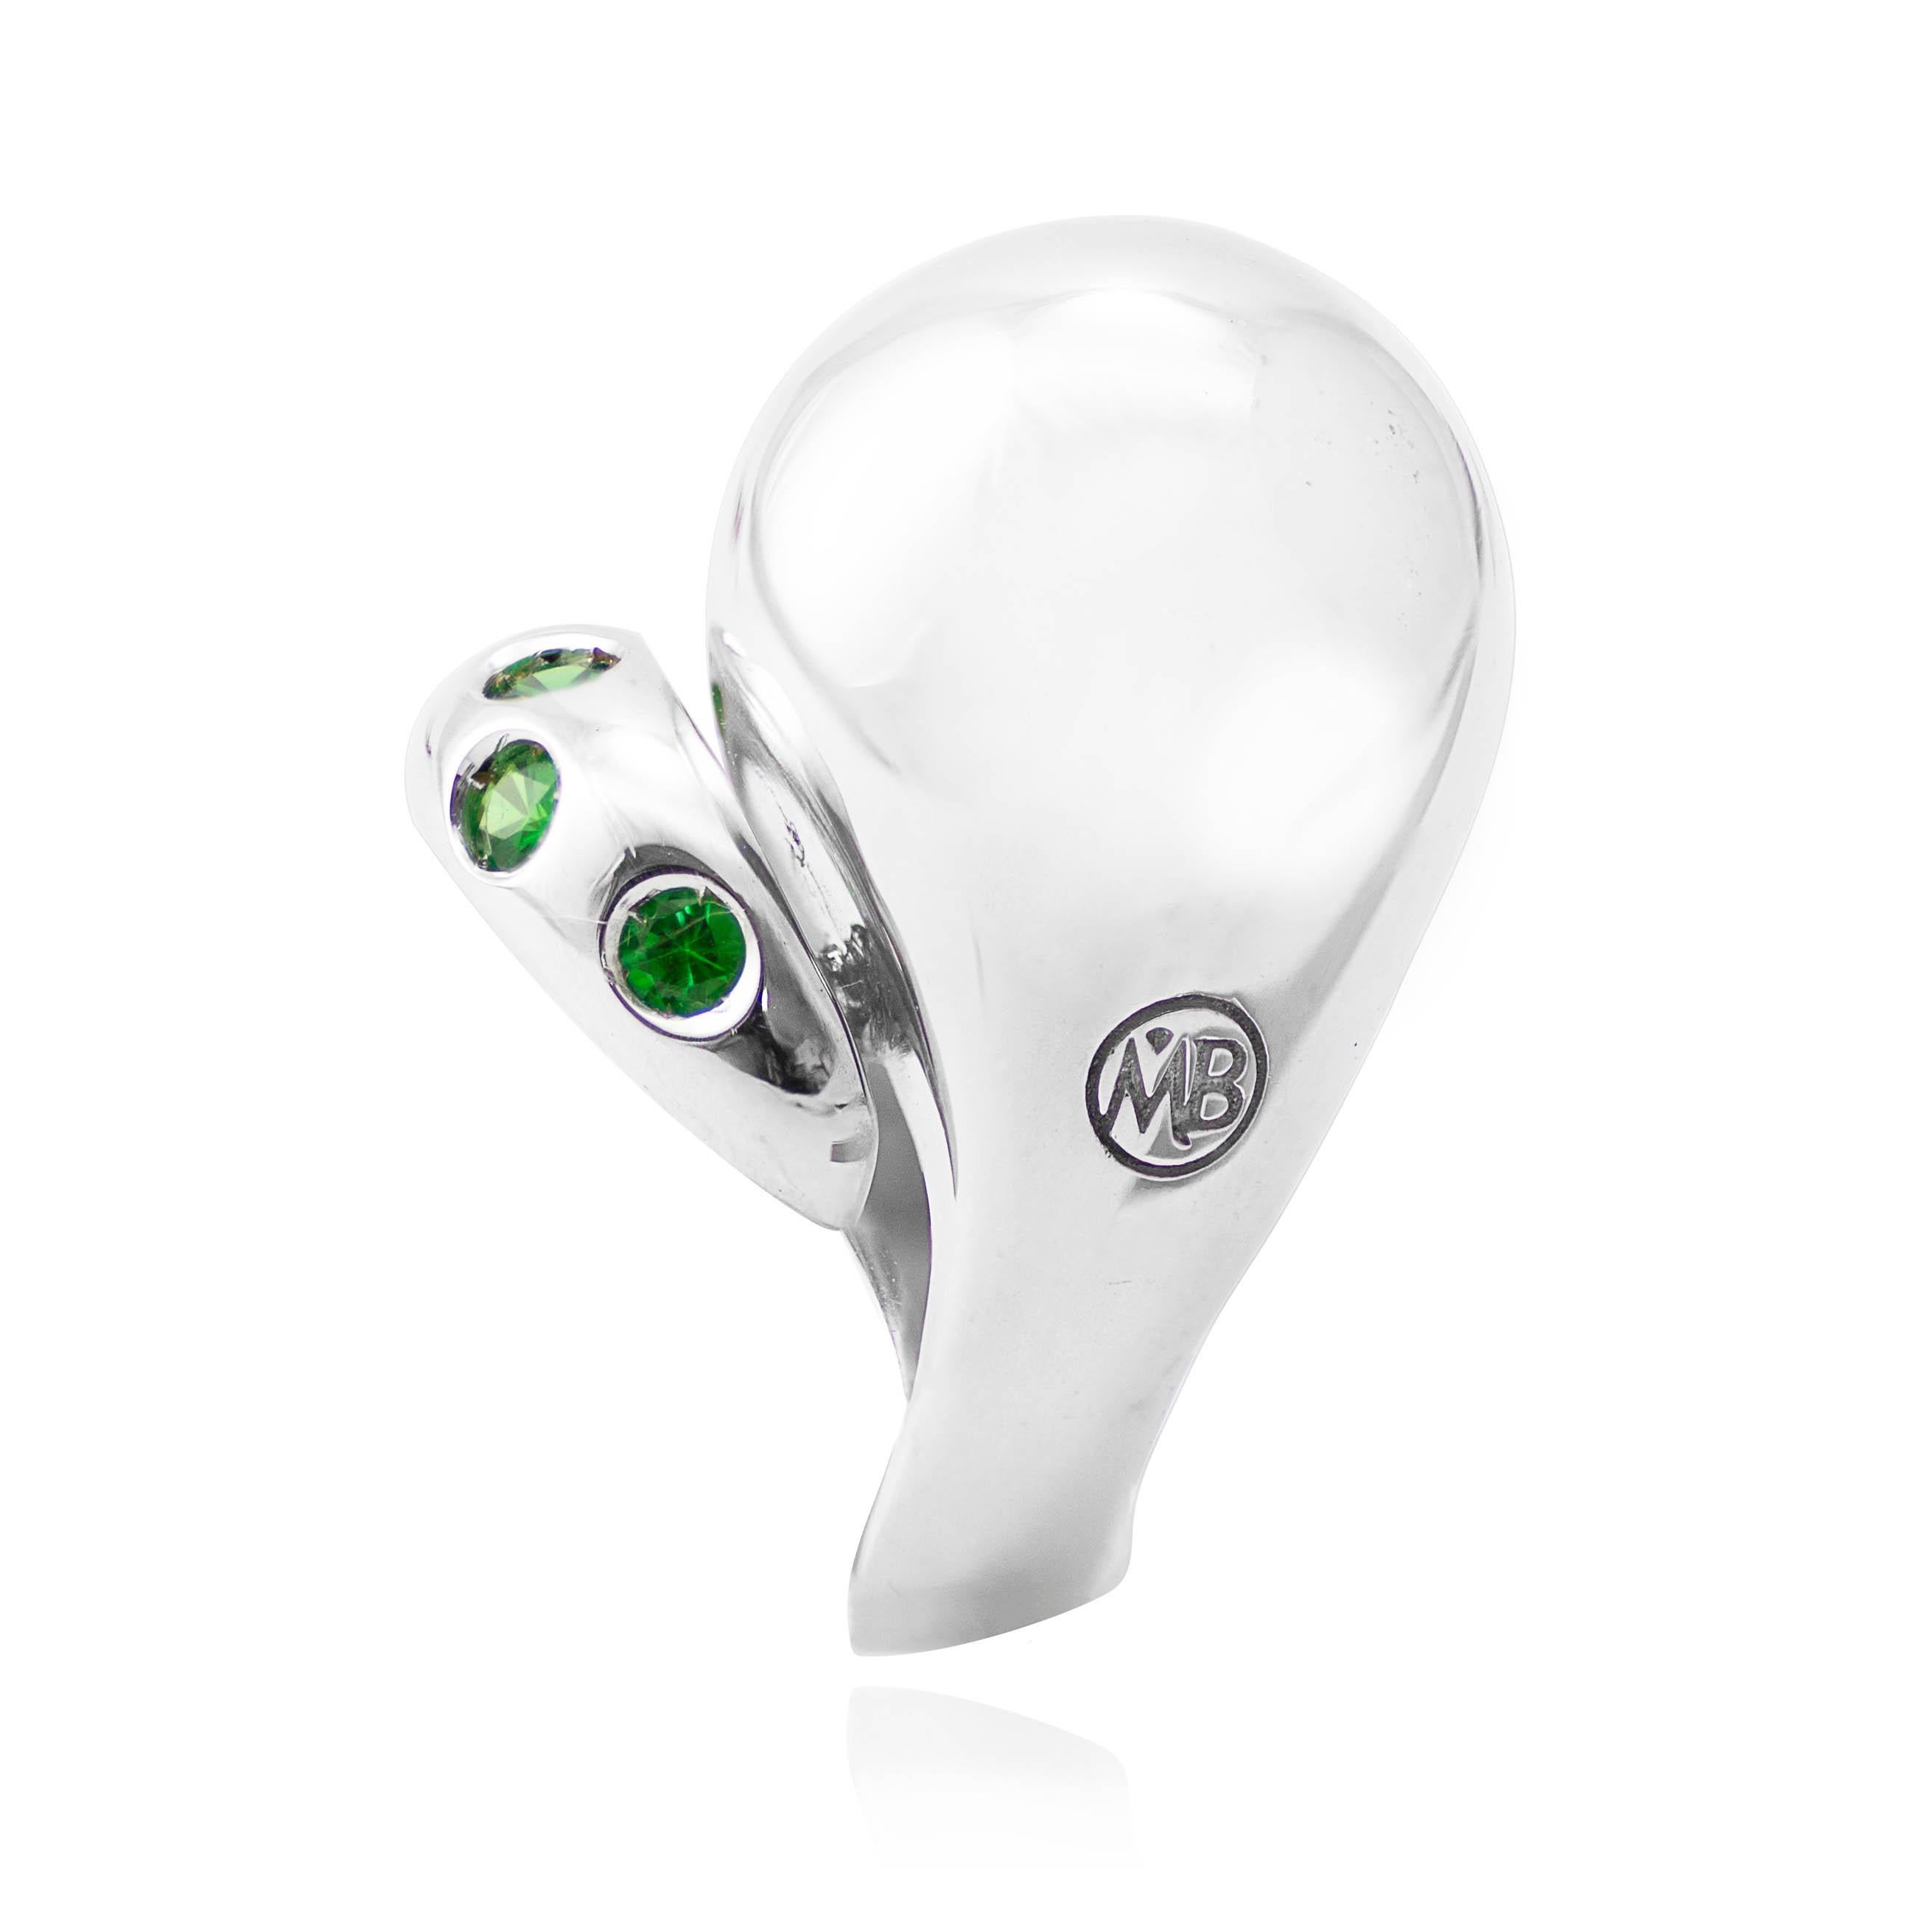 The iconic Margherita Burgener Balloon ring here realized in 925 silver polished version, set with five round green tsavorite garnet.
Stylish and comfortable, a ring you wear every day and enjoy all time.
A great gift idea of a best quality made in